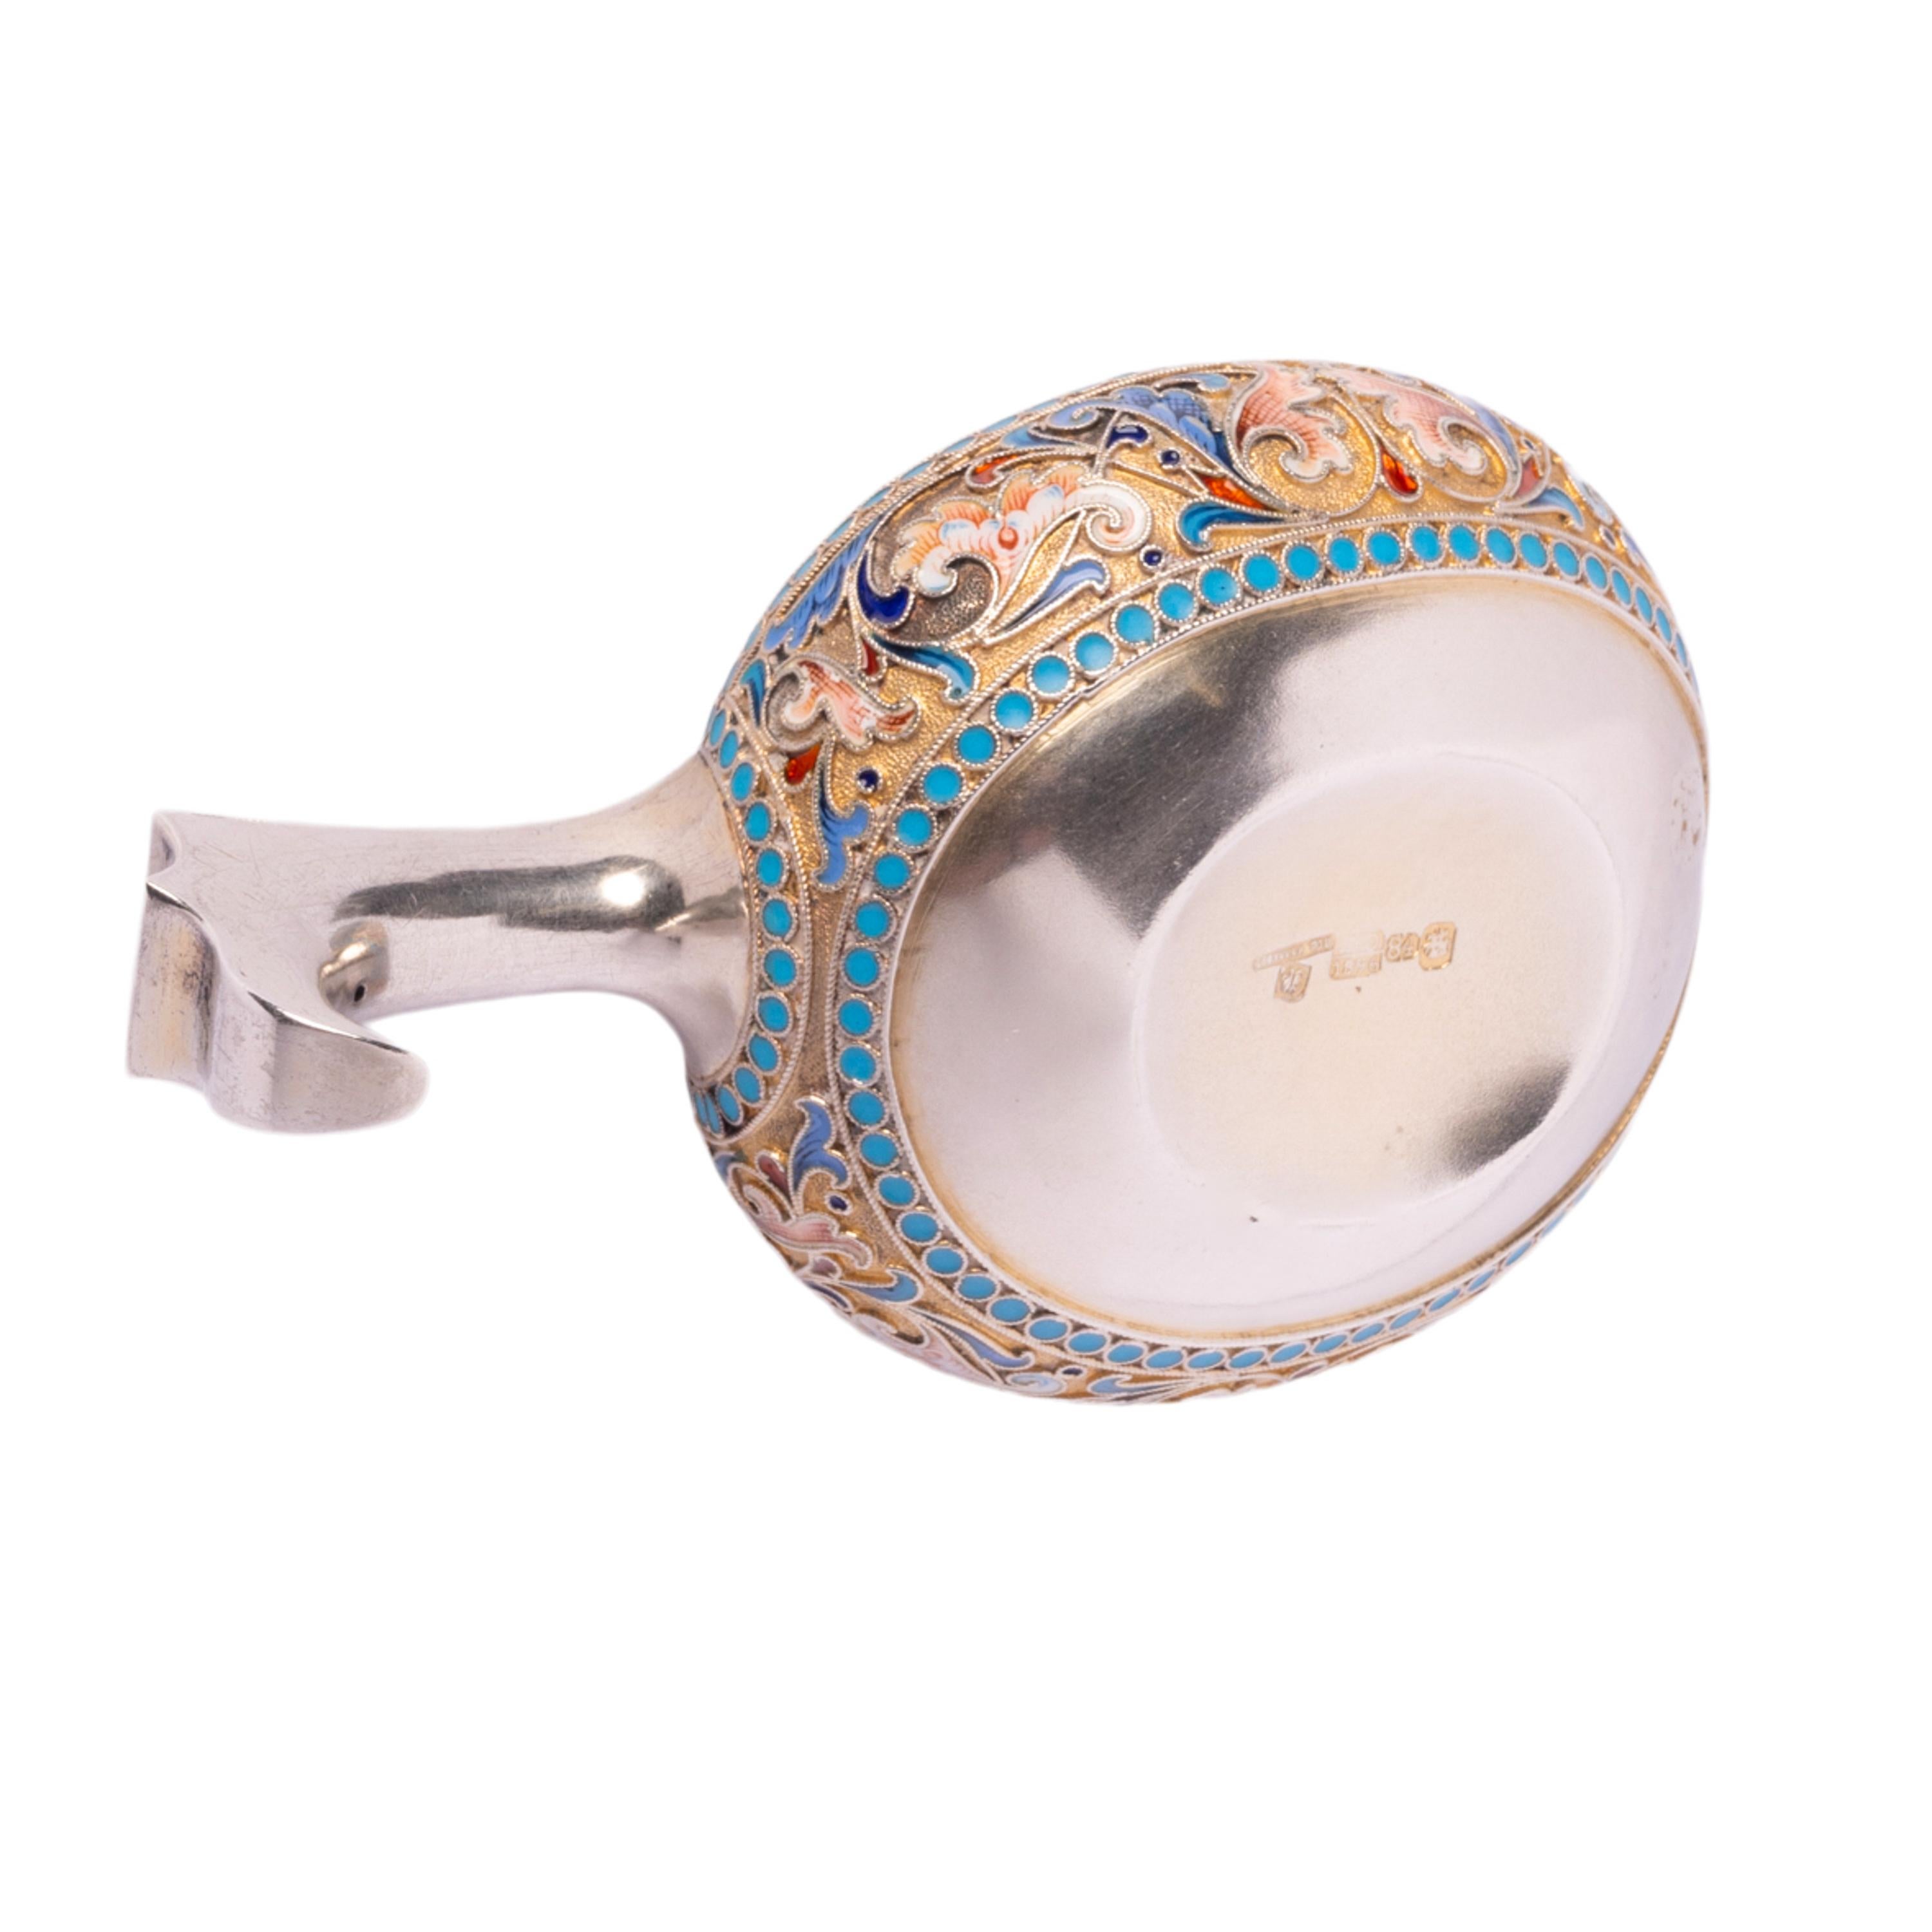 Antique Imperial Russian Silver Cloisonne Enamel Kovsh Ovchinnikov Moscow 1896 For Sale 5